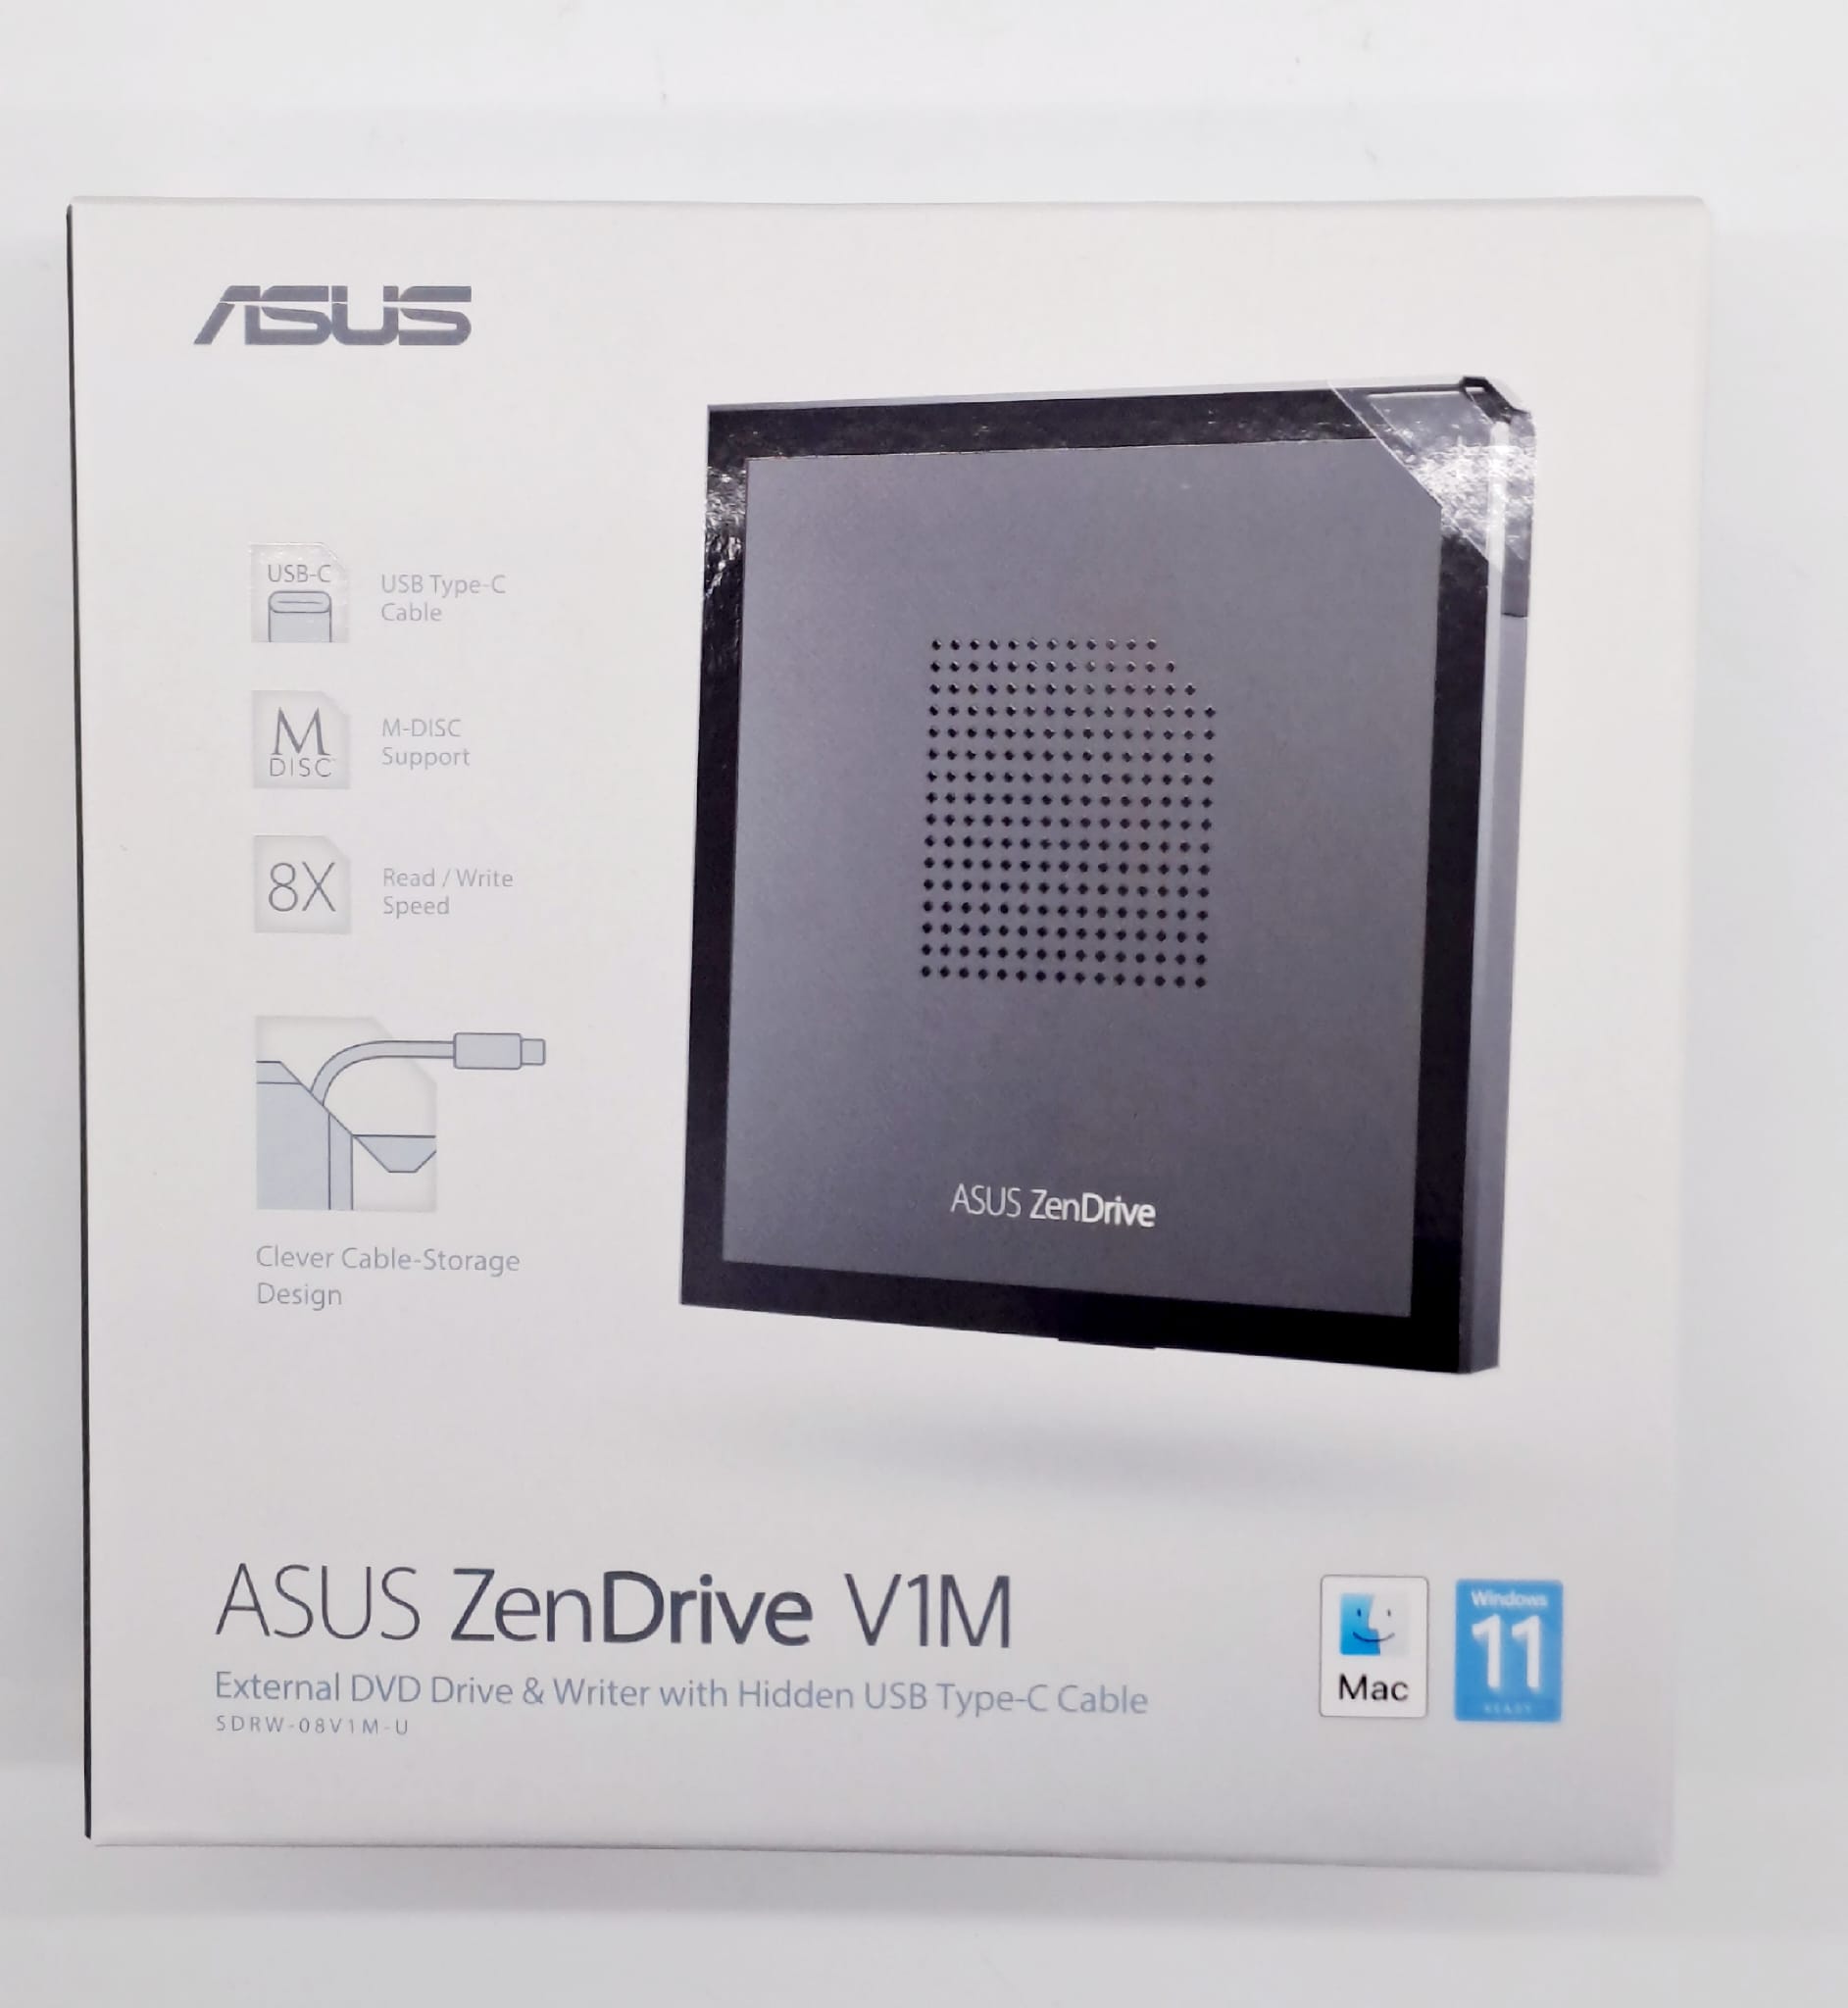 ASUS ZenDrive V1M External DVD Drive & Writer with Hidden USB-C Cable